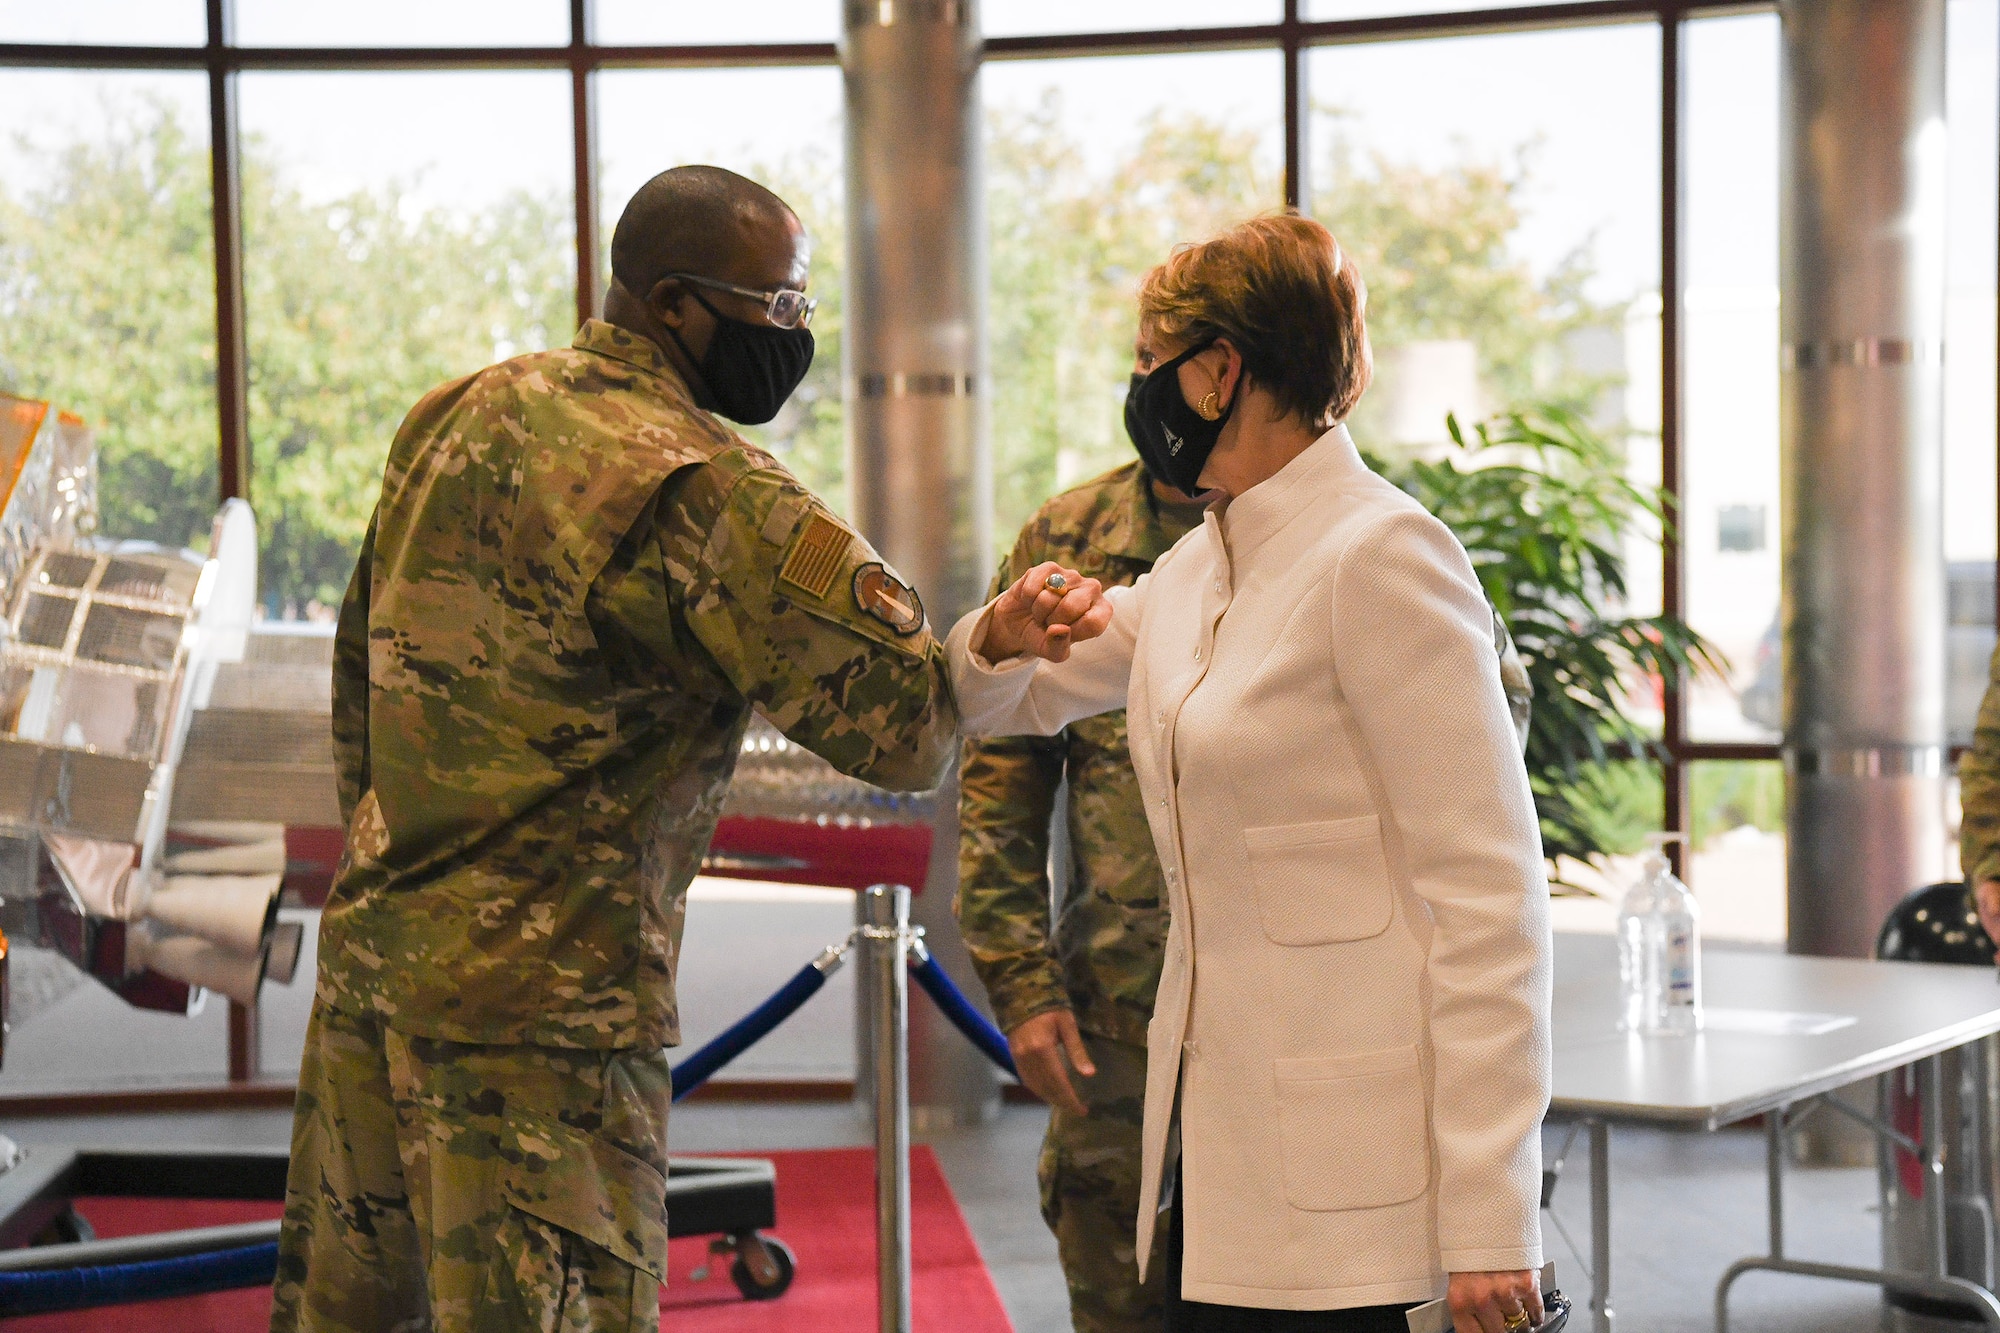 Chief Master Sgt. Willie Frazier II, Space Delta 4 senior enlisted leader, greets Secretary of the Air Force Barbara Barrett, Sept. 23, 2020 at DEL 4’s Mission Control Station on Buckley Air Force Base, Colo.